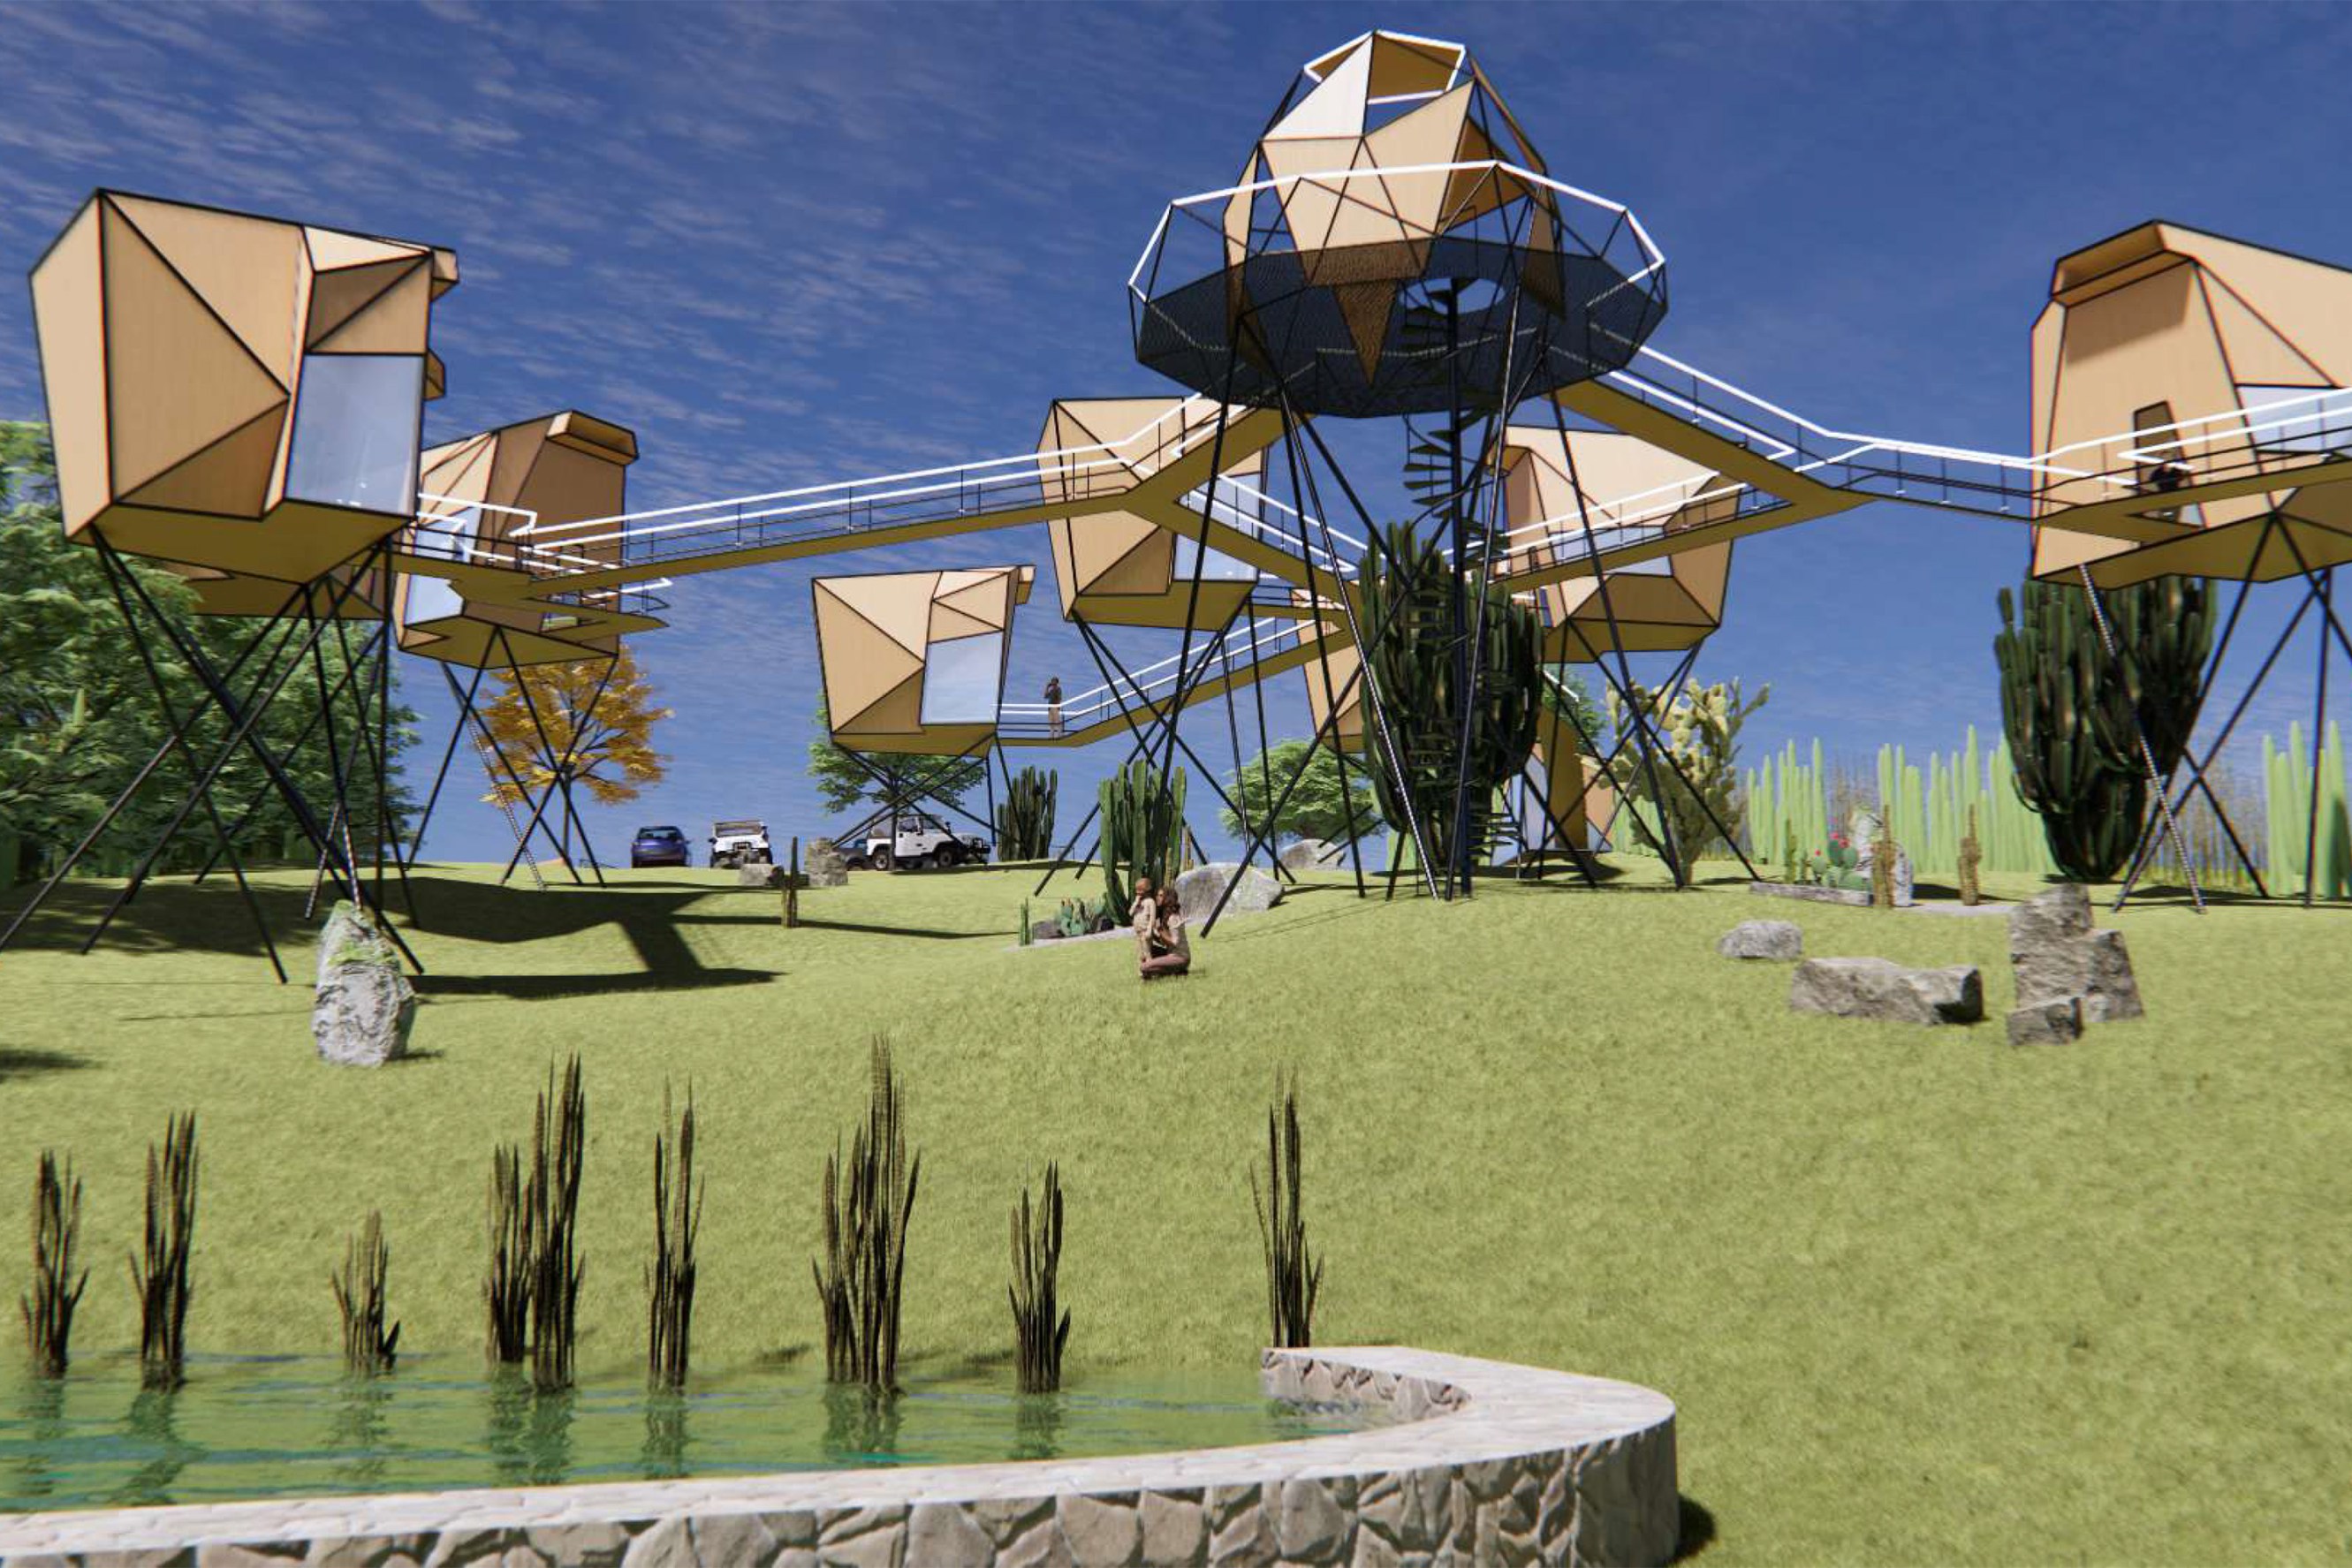 Ten tent treehouses suspended in the air with connecting bridges and ladders